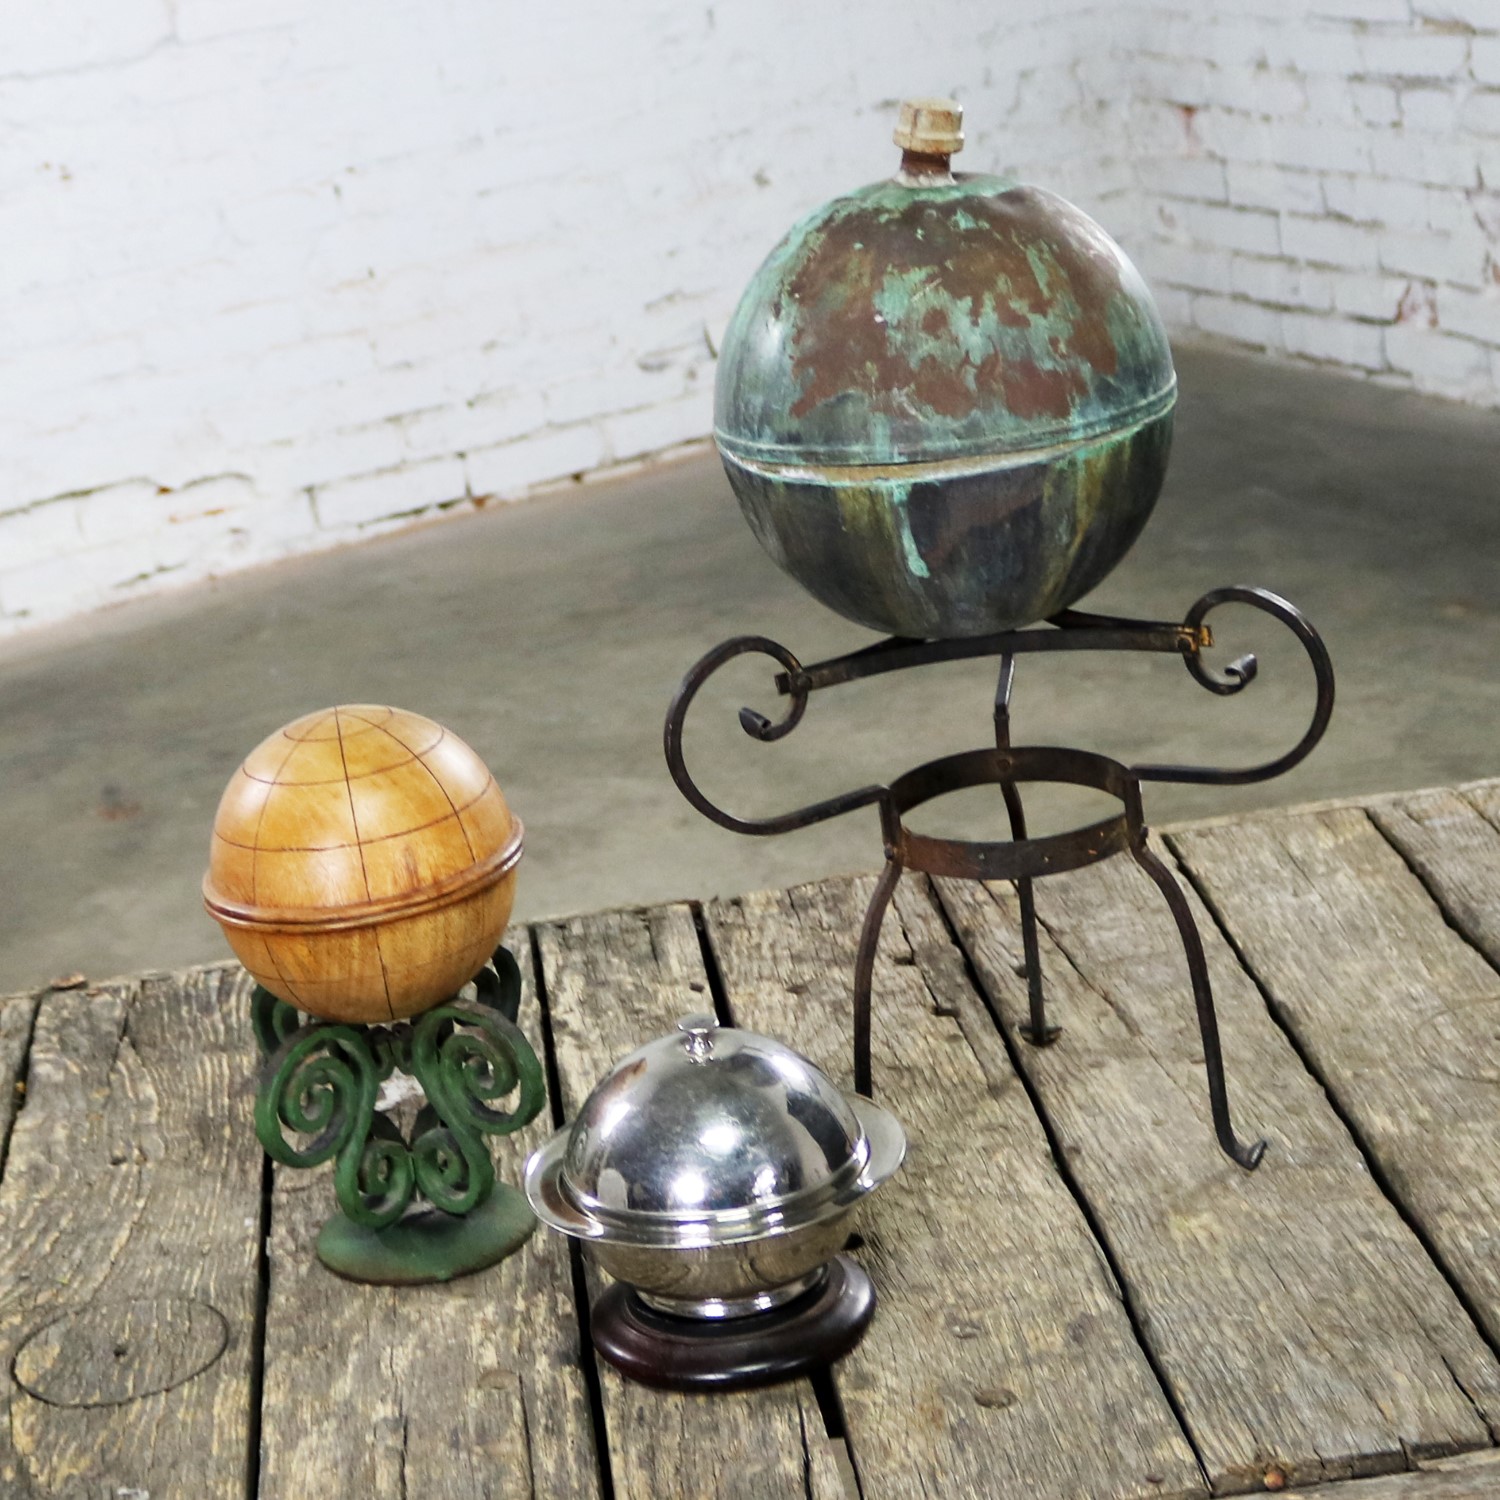 Collection of Orb Objects on Stands as Centerpiece or Object d ‘Art